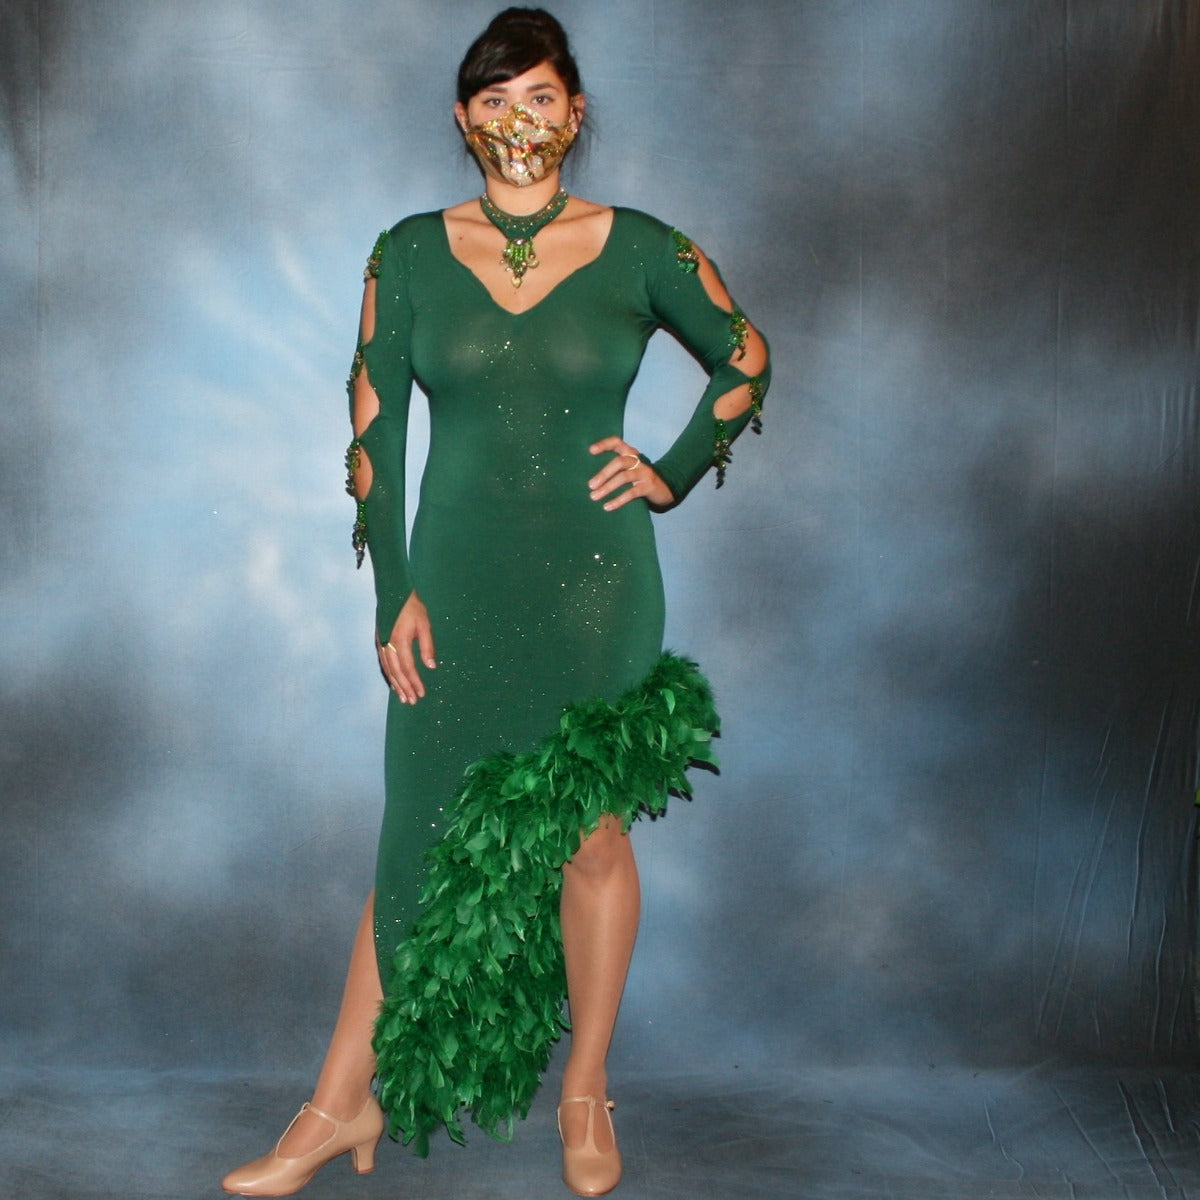 Crystal's Creations Emerald green Latin/rhythm dress was created in luxurious deep emerald glitter slinky, embellished with chandelle feathers & Swarovski hand beaded detailing, size 5/6-11/12, very stretchy